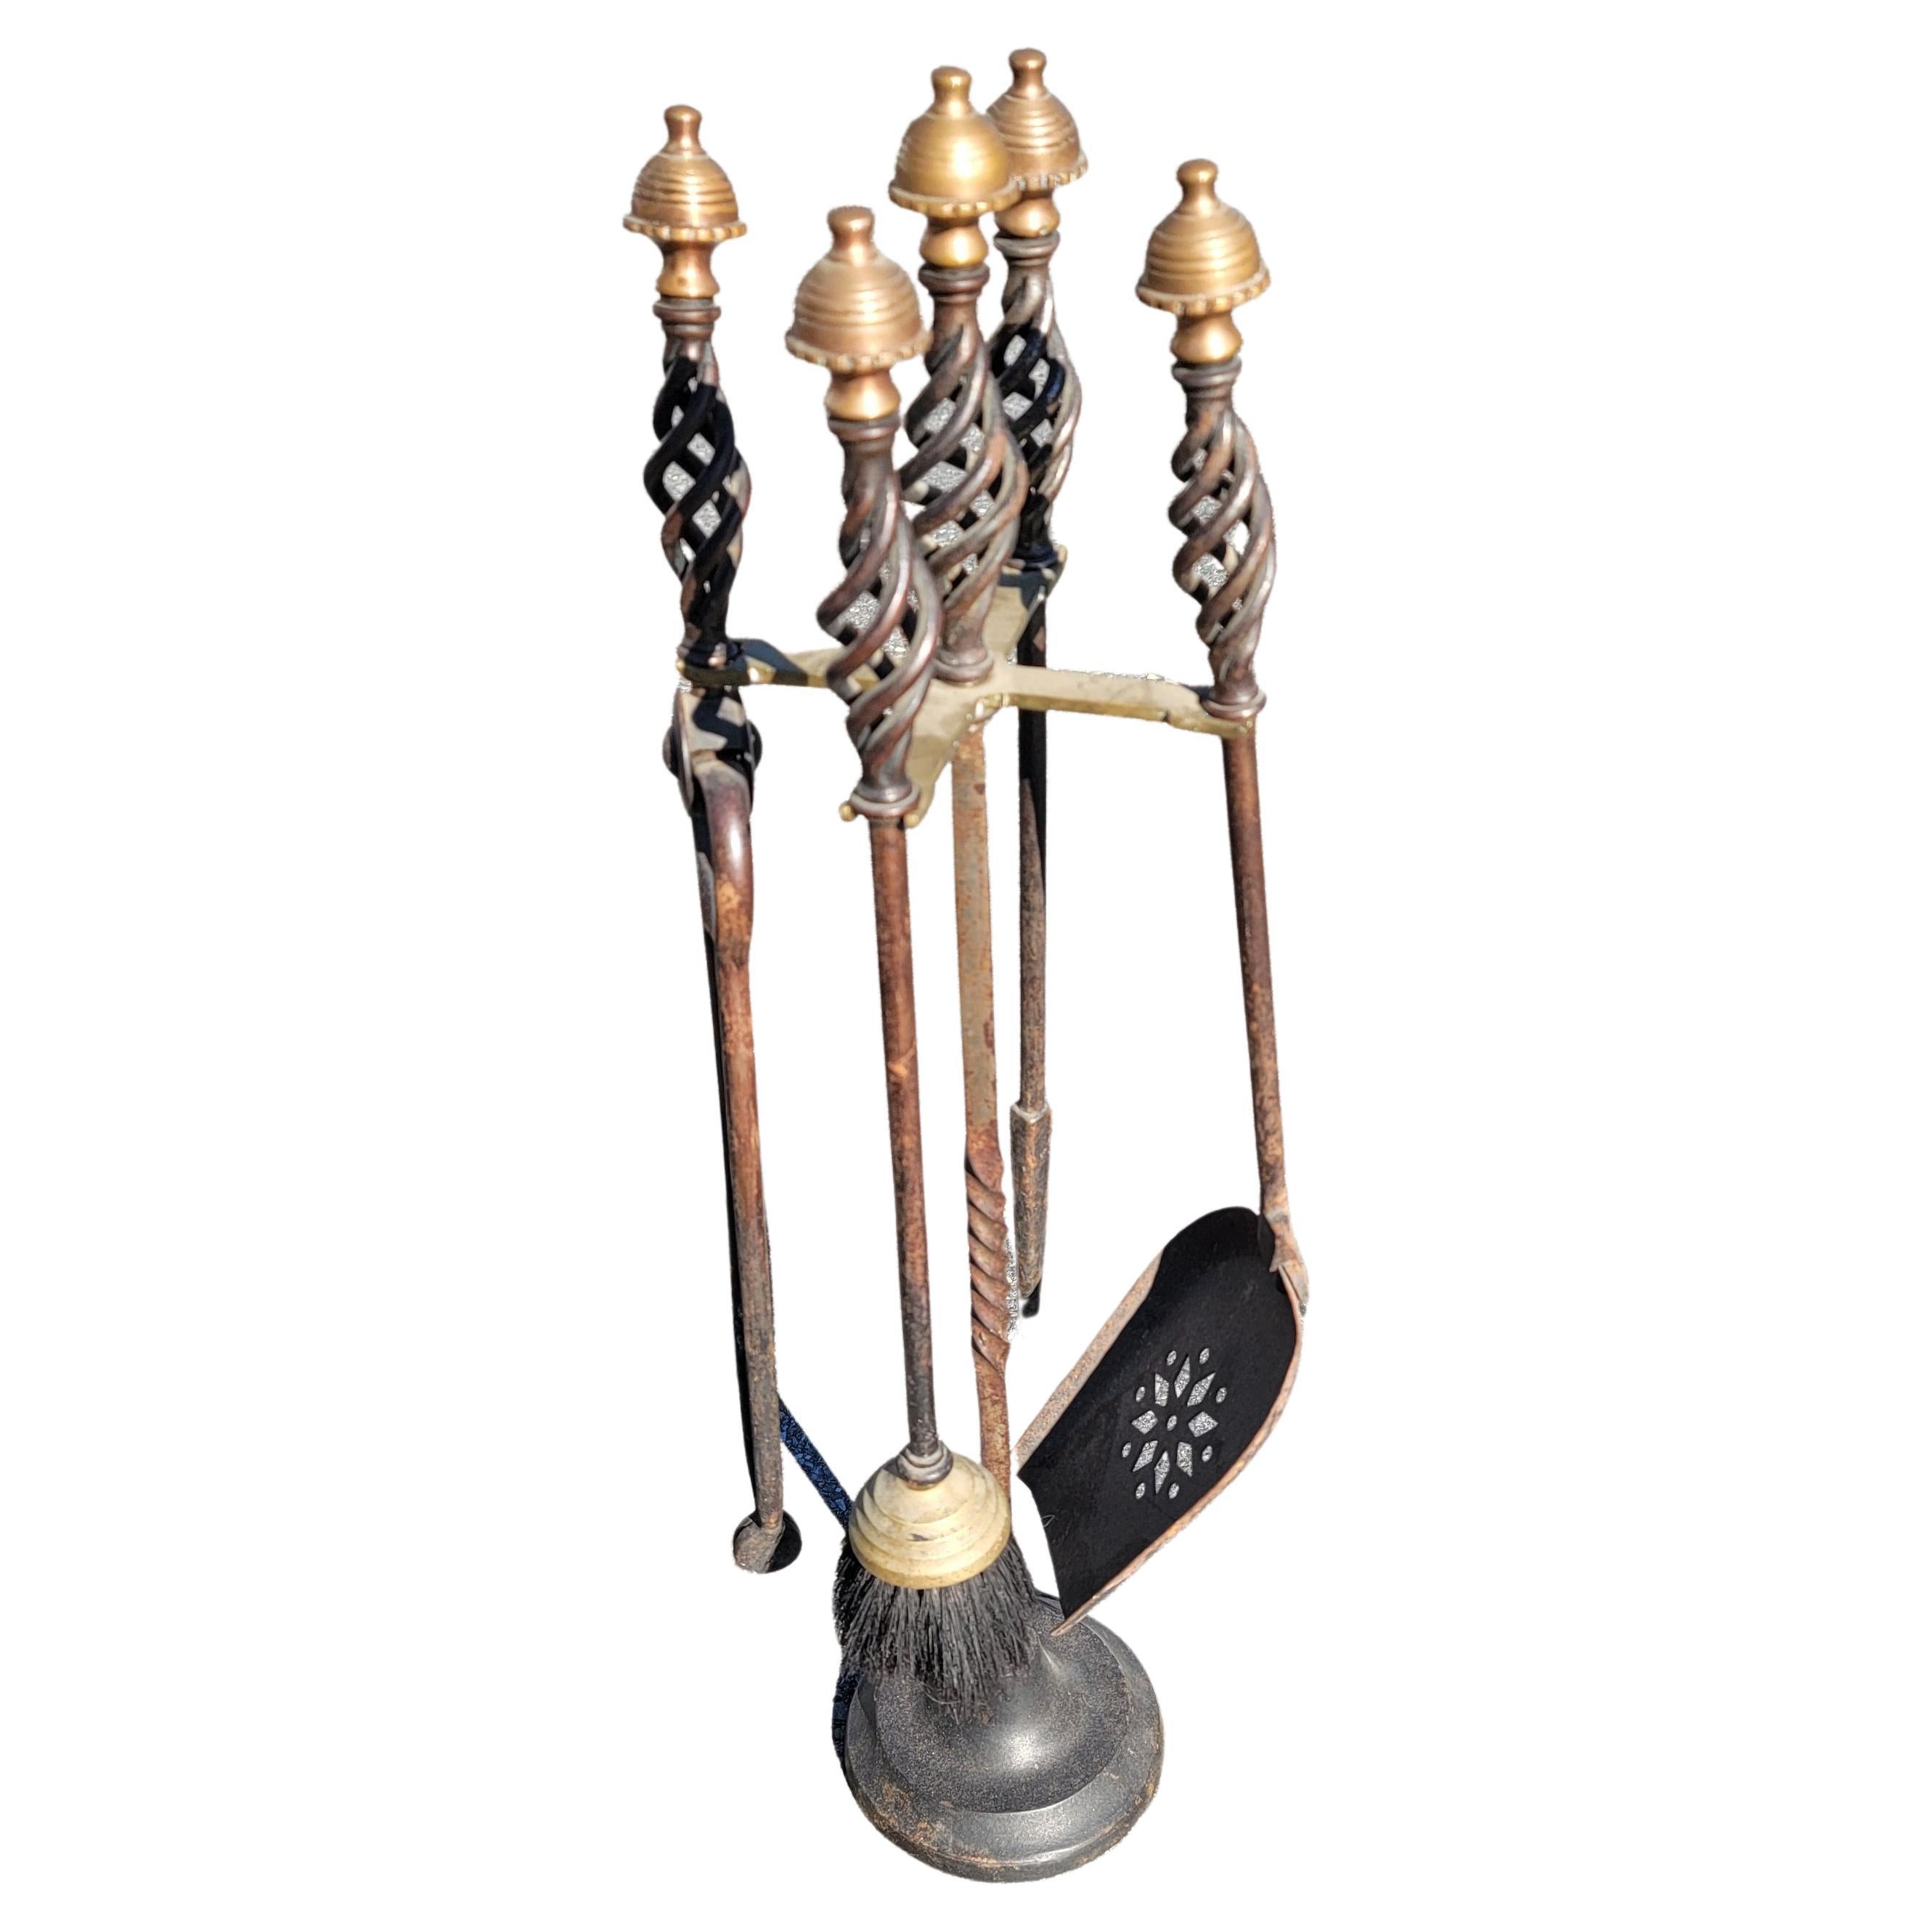 Set of 5 American Art Deco Brass Mushroom Head and Iron Fireplace Tools w/Stand 